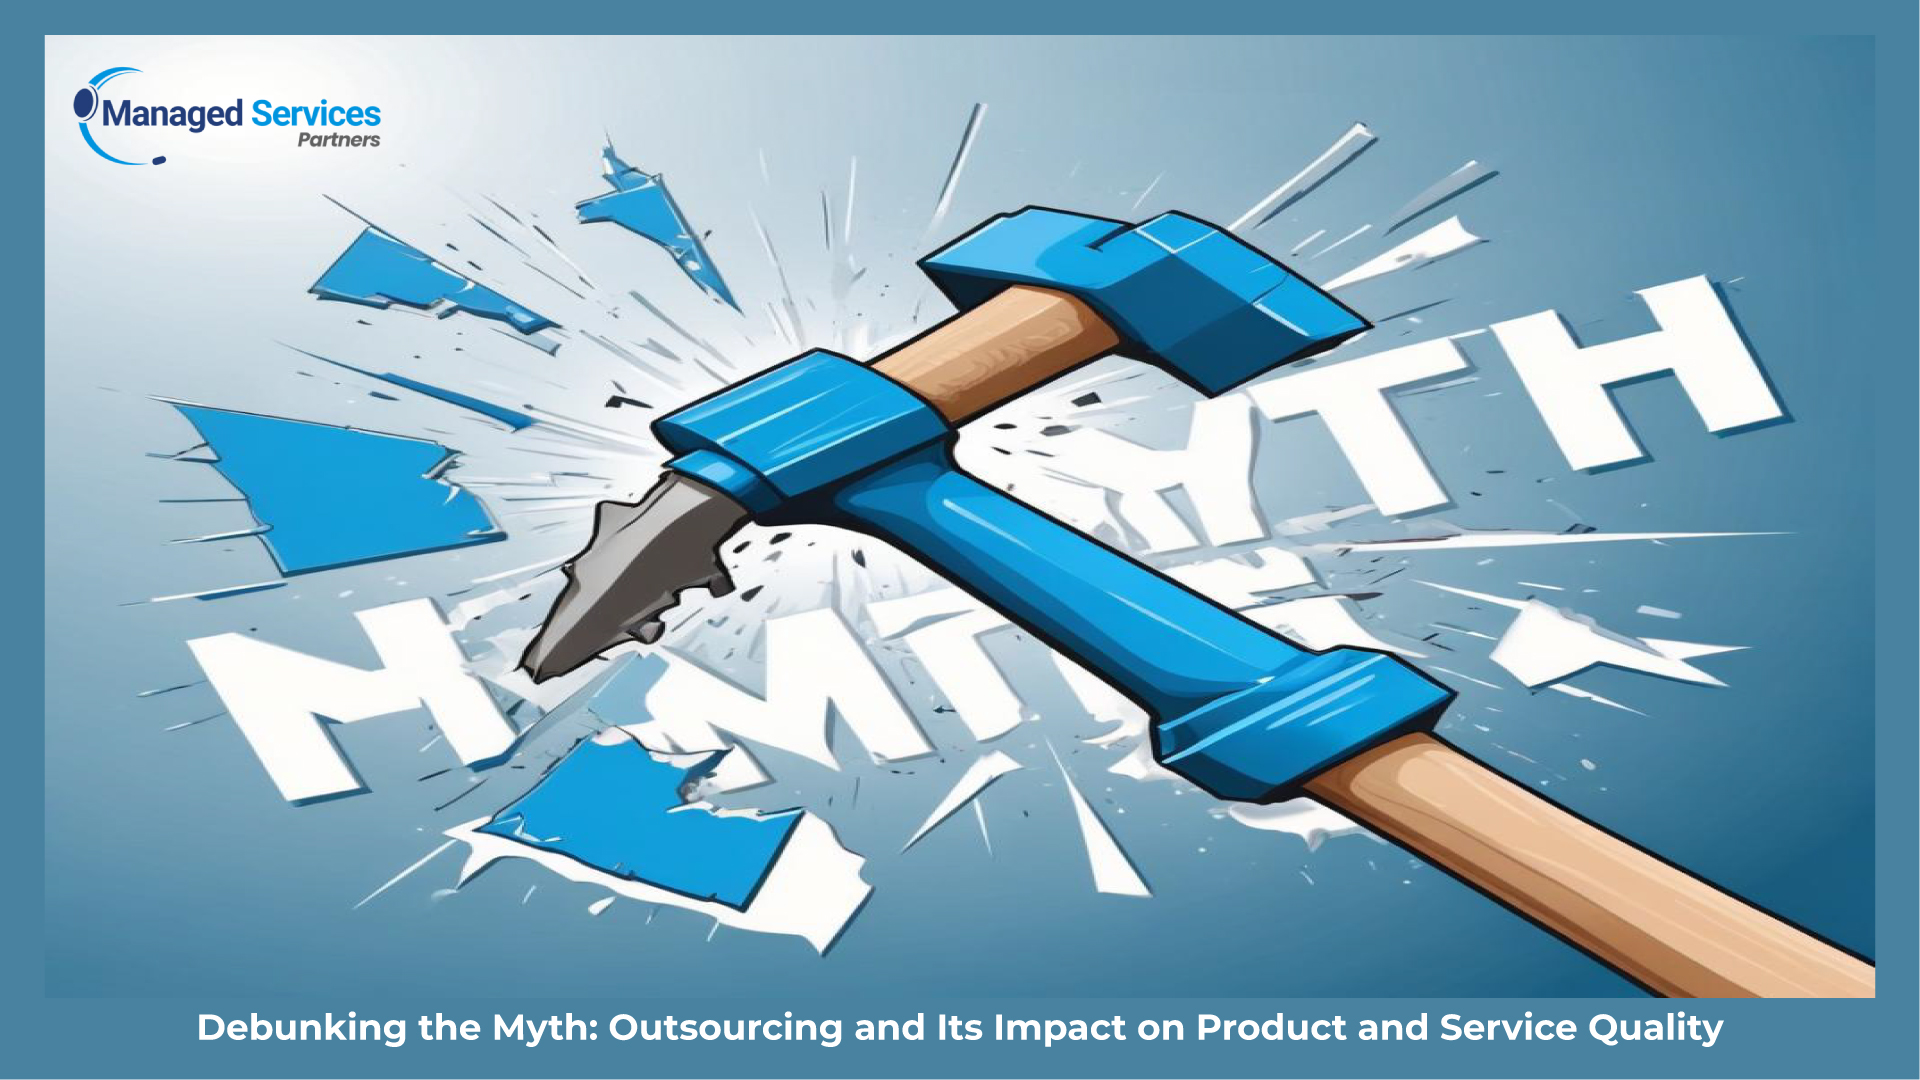 Debunking the Myth: Outsourcing and Its Impact on Product and Service Quality